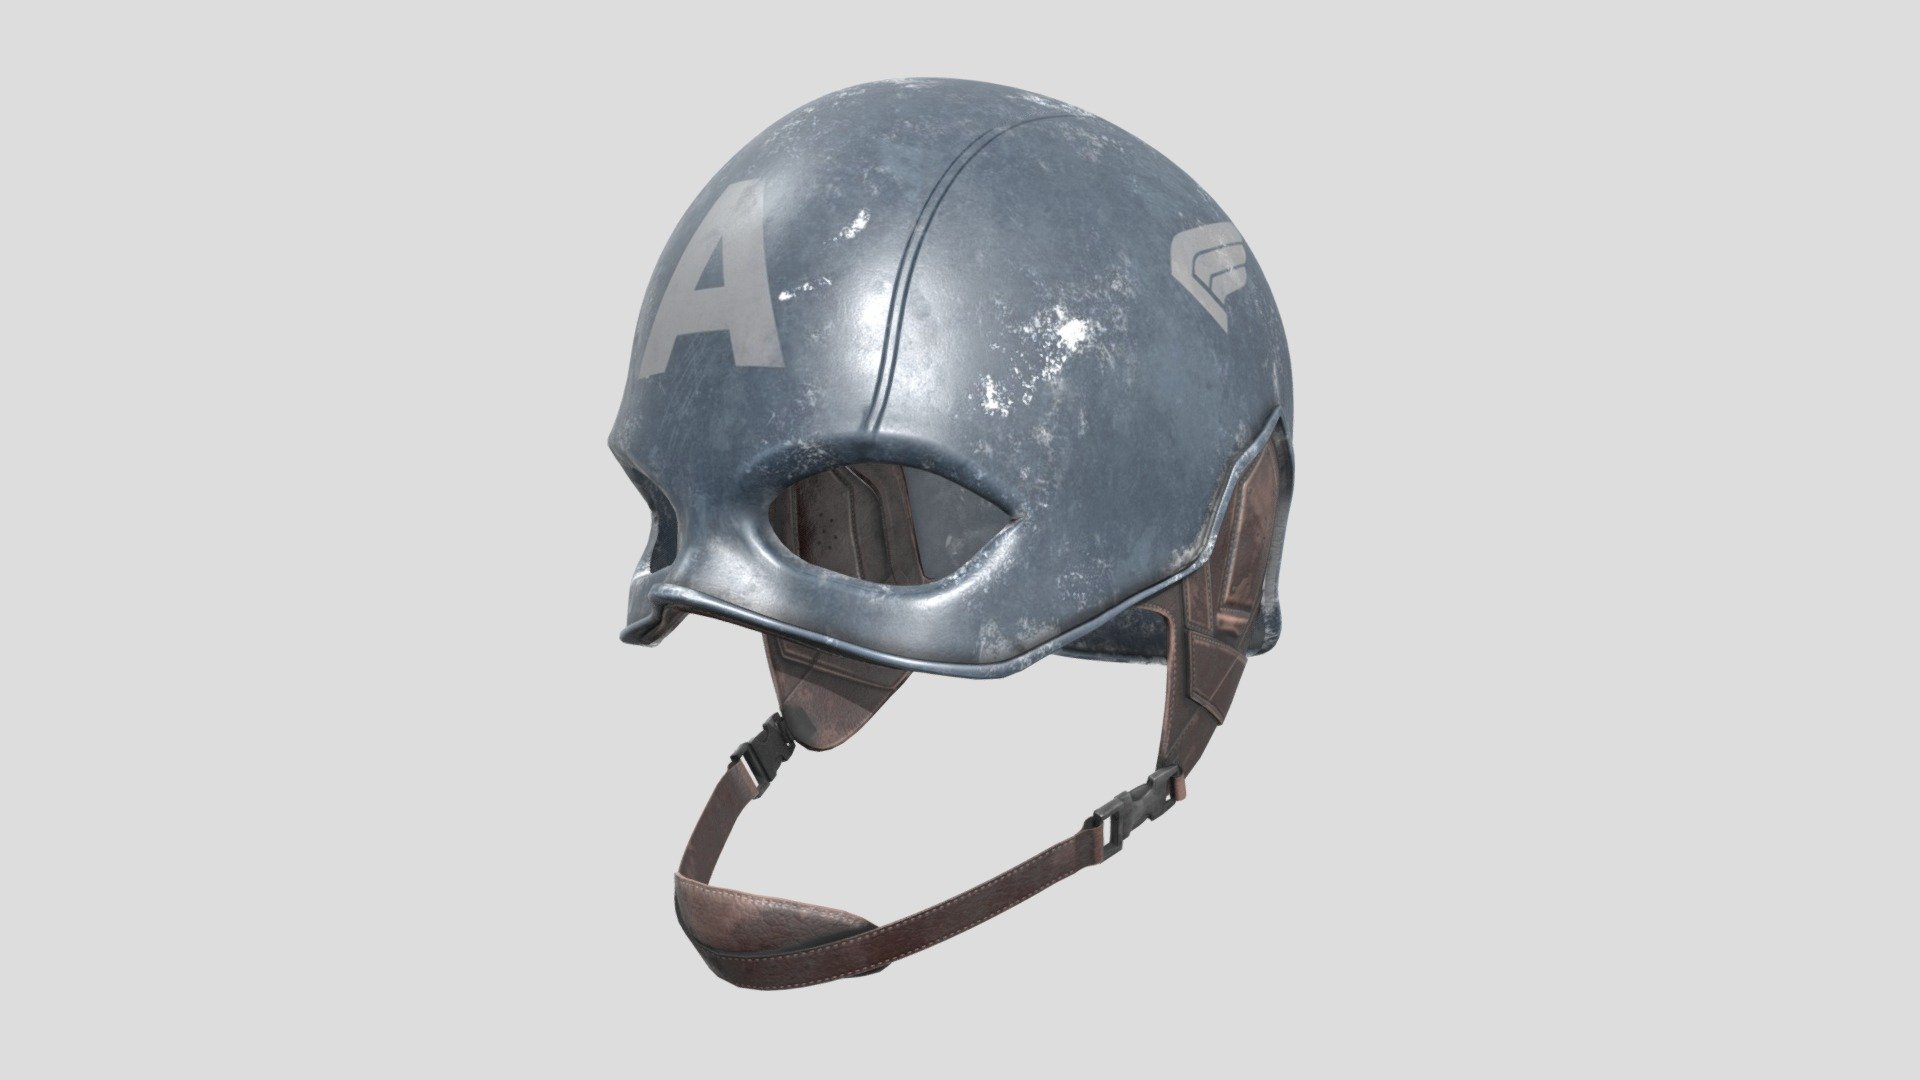 Captain America Helmet PBR is an optimized model with excellent texturing for best outcome.

The model has an optimized low poly mesh with the greatest possible number of simplifications that do not affect photo-realism but can help to simplify it, thus lightening your scene and allowing for using this model in real-time 3d applications.

In this product, all objects are ERROR-FREE. All LEGAL Geometry. Subdivisions are not required for this product. Real-world accurate model.


Format Type



3ds Max 2017 (Default Physical PBR Shader)

FBX

OBJ

3DS


Texture Type



Albedo

Metalness

Roughness

Normal

Ambient Occlusion

You might need to re-assign textures map to model in your relevant software

You might need to flip green channel of Normal map according to your relevant softwar - Captain America Helmet PBR - Buy Royalty Free 3D model by luxe3dworld 3d model